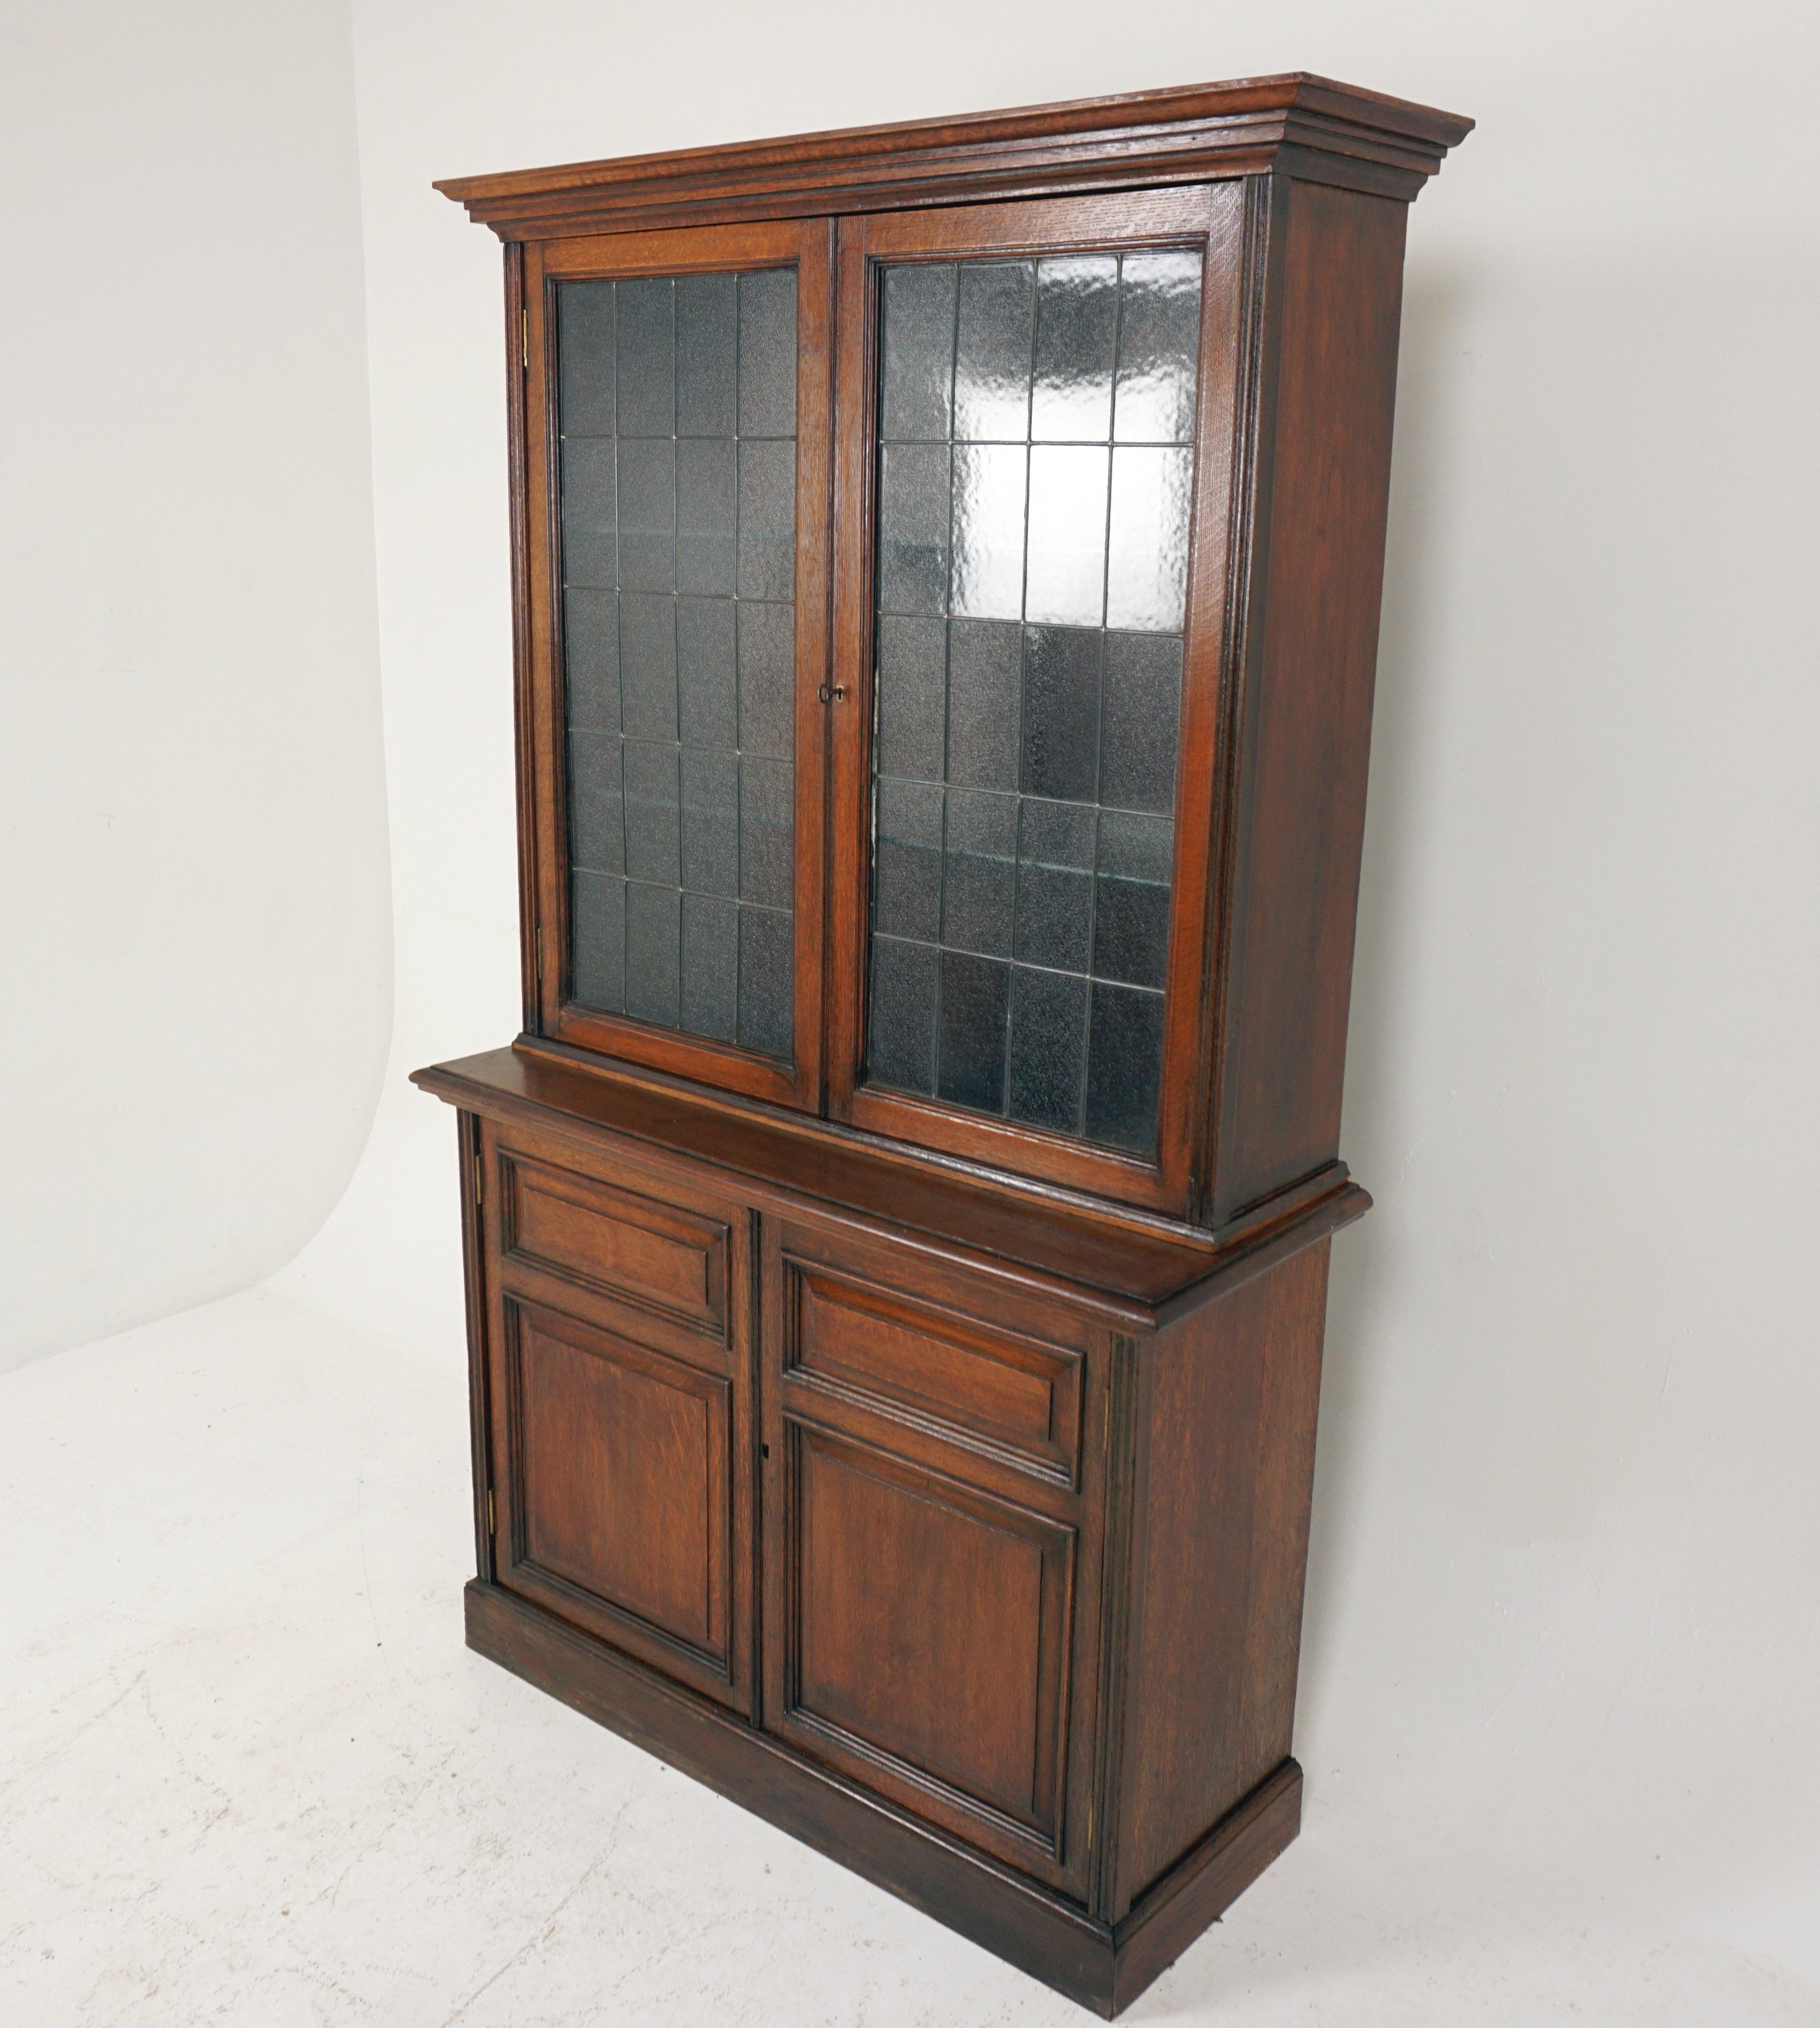 Antique Victorian 4 door bookcase, display cabinet, Scotland 1900, H277

Scotland 1900
Solid oak
Original finish
Moulded cornice on top
Pair of original textured glass doors with moulding to the front
Doors open to reveal shelves
Base has a pair of